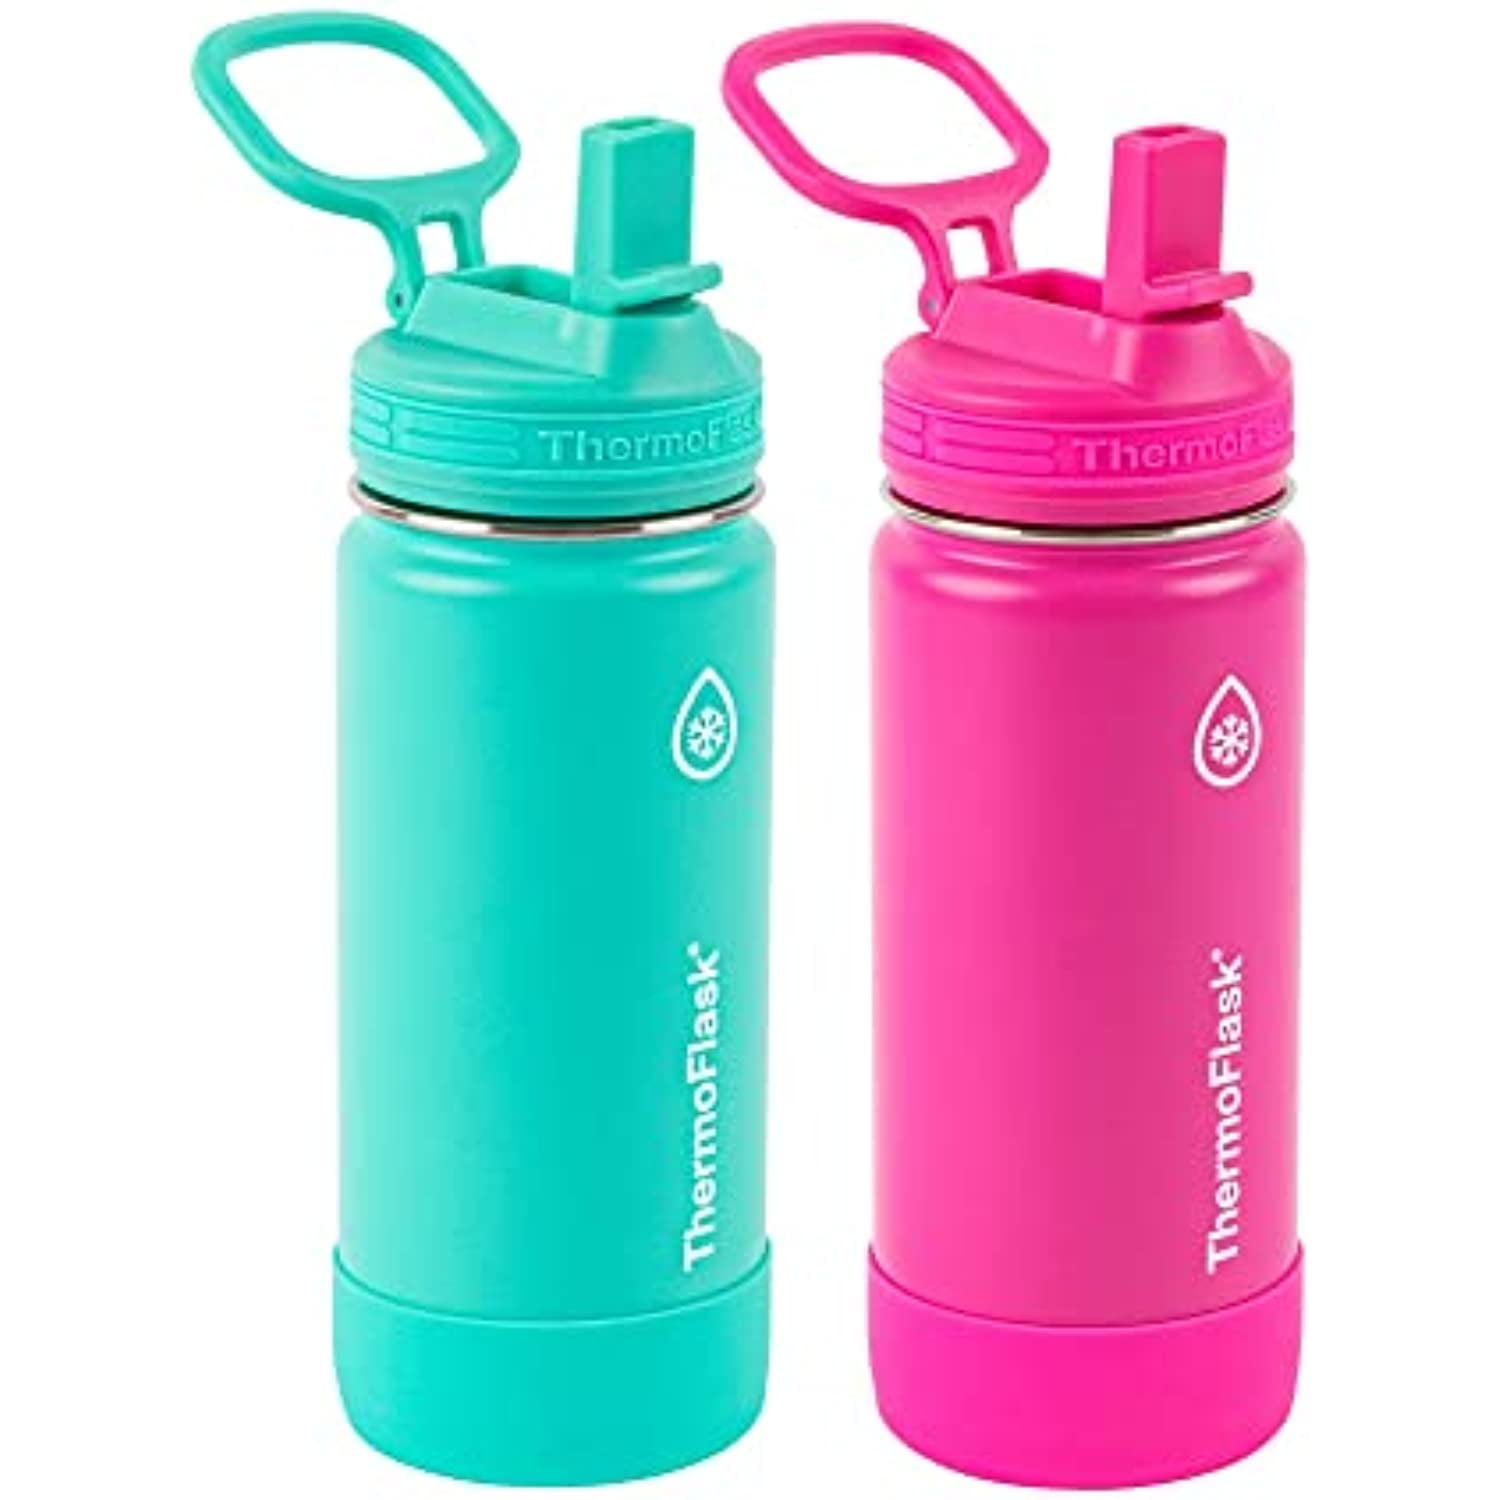 Here is your most Ideal price Thermoflask Kids 16 oz Stainless Steel  Insulated Water Bottles, 2, 16 oz water bottle kids